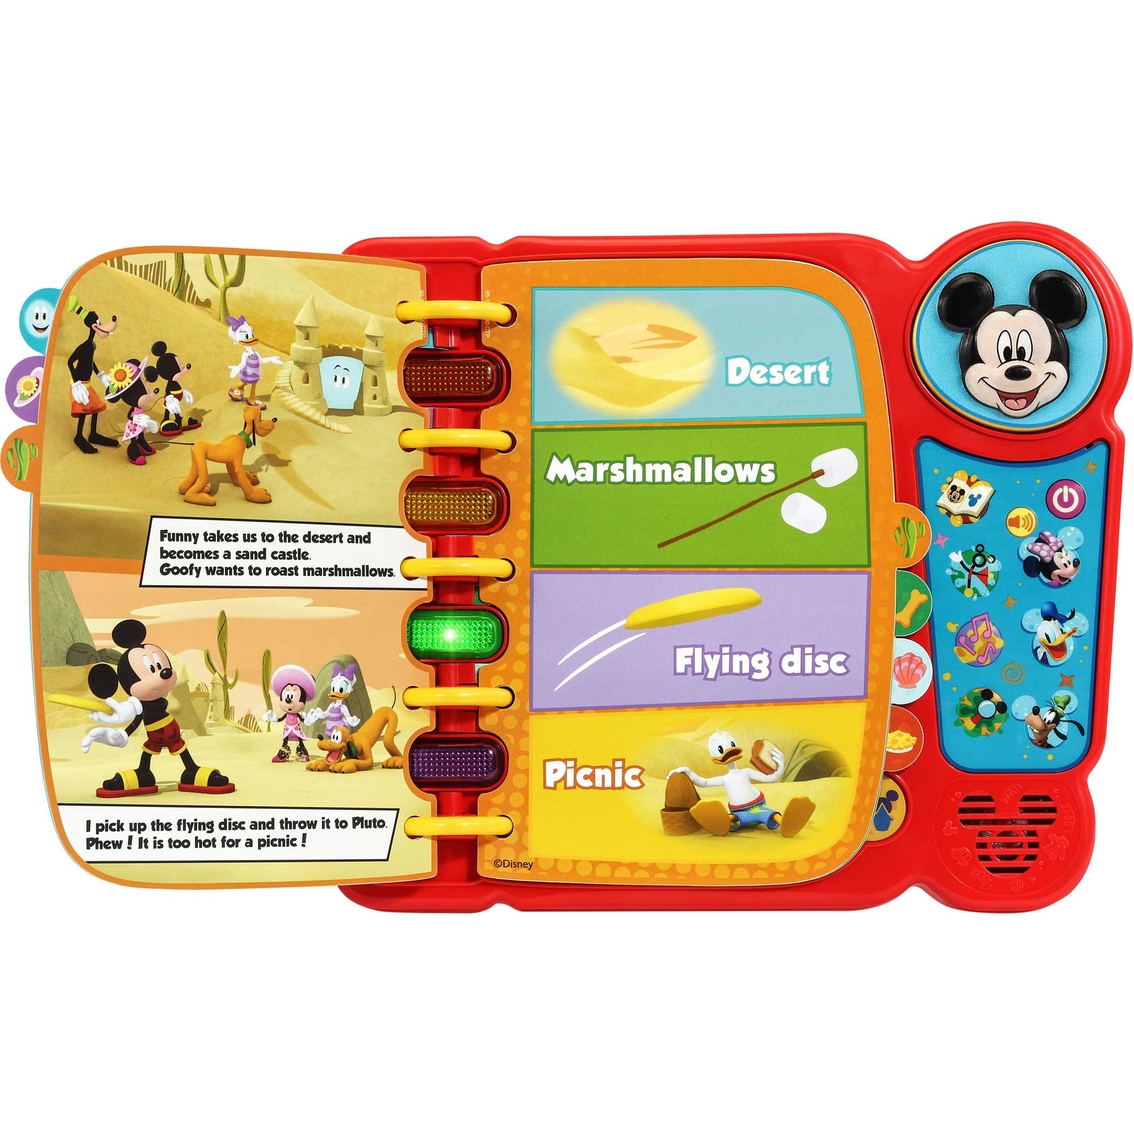 Enter Mickey Mouse's Funhouse with New Toys Based on the Disney